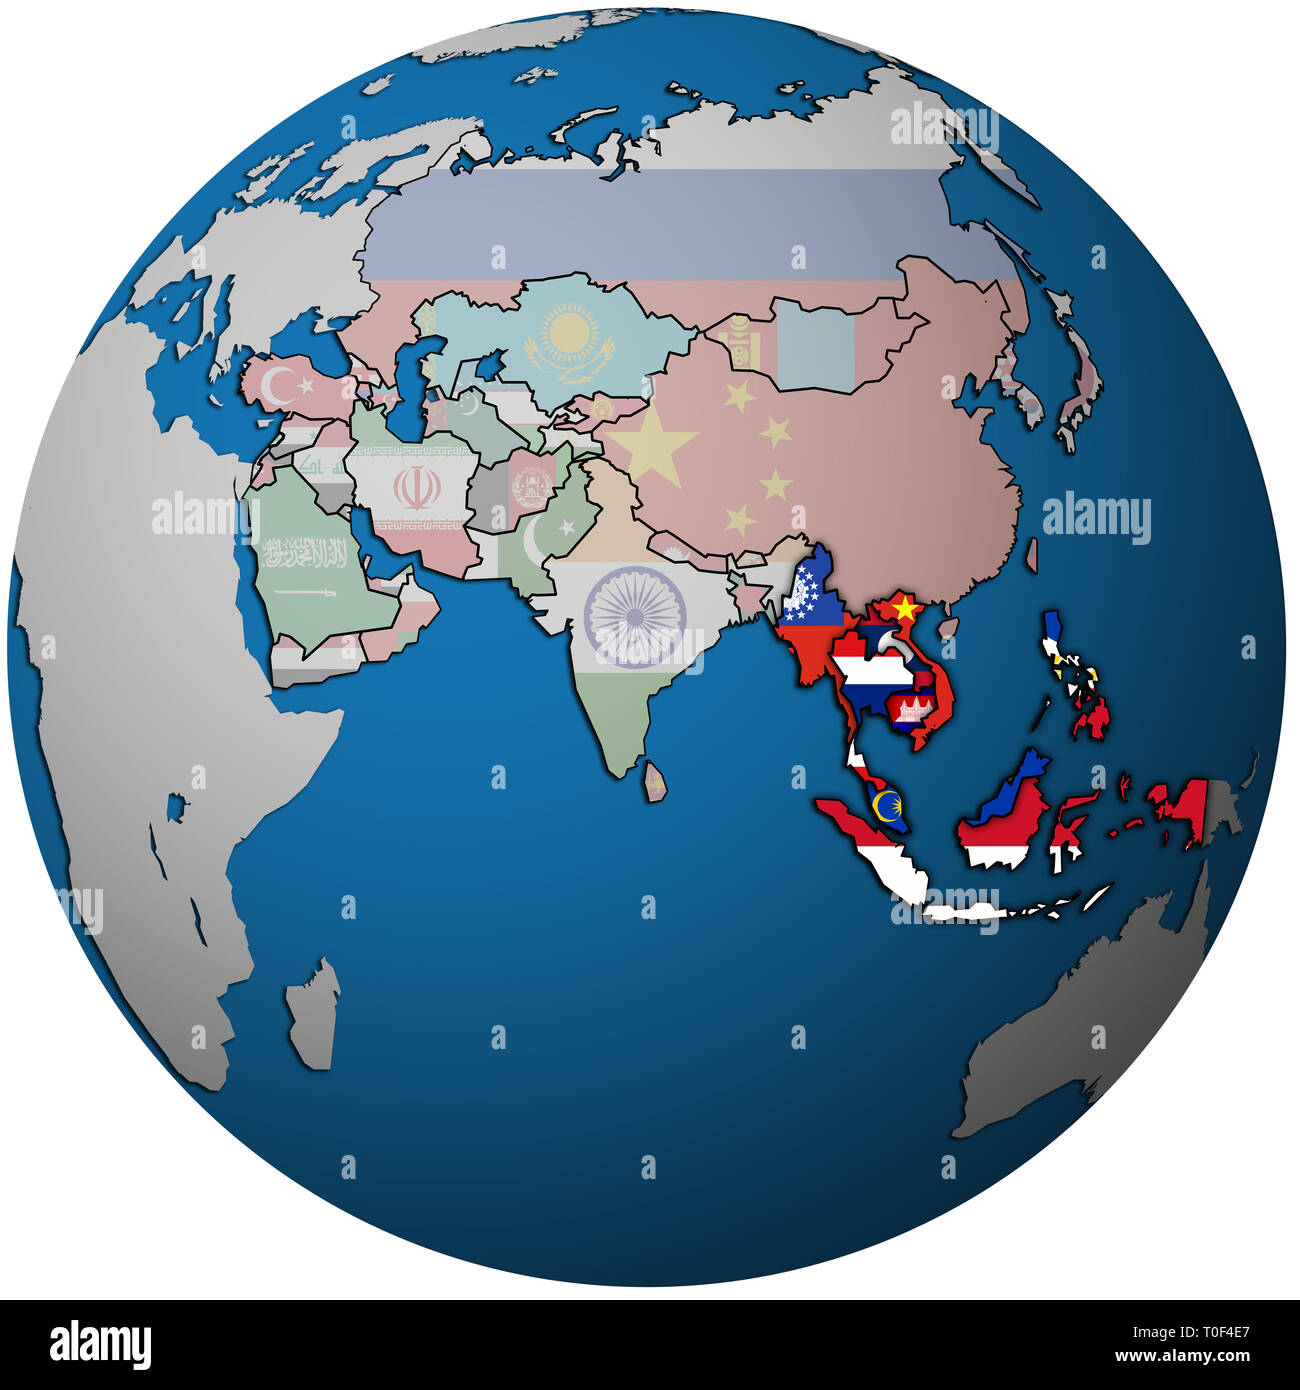 Asia Pacific Countries Map 